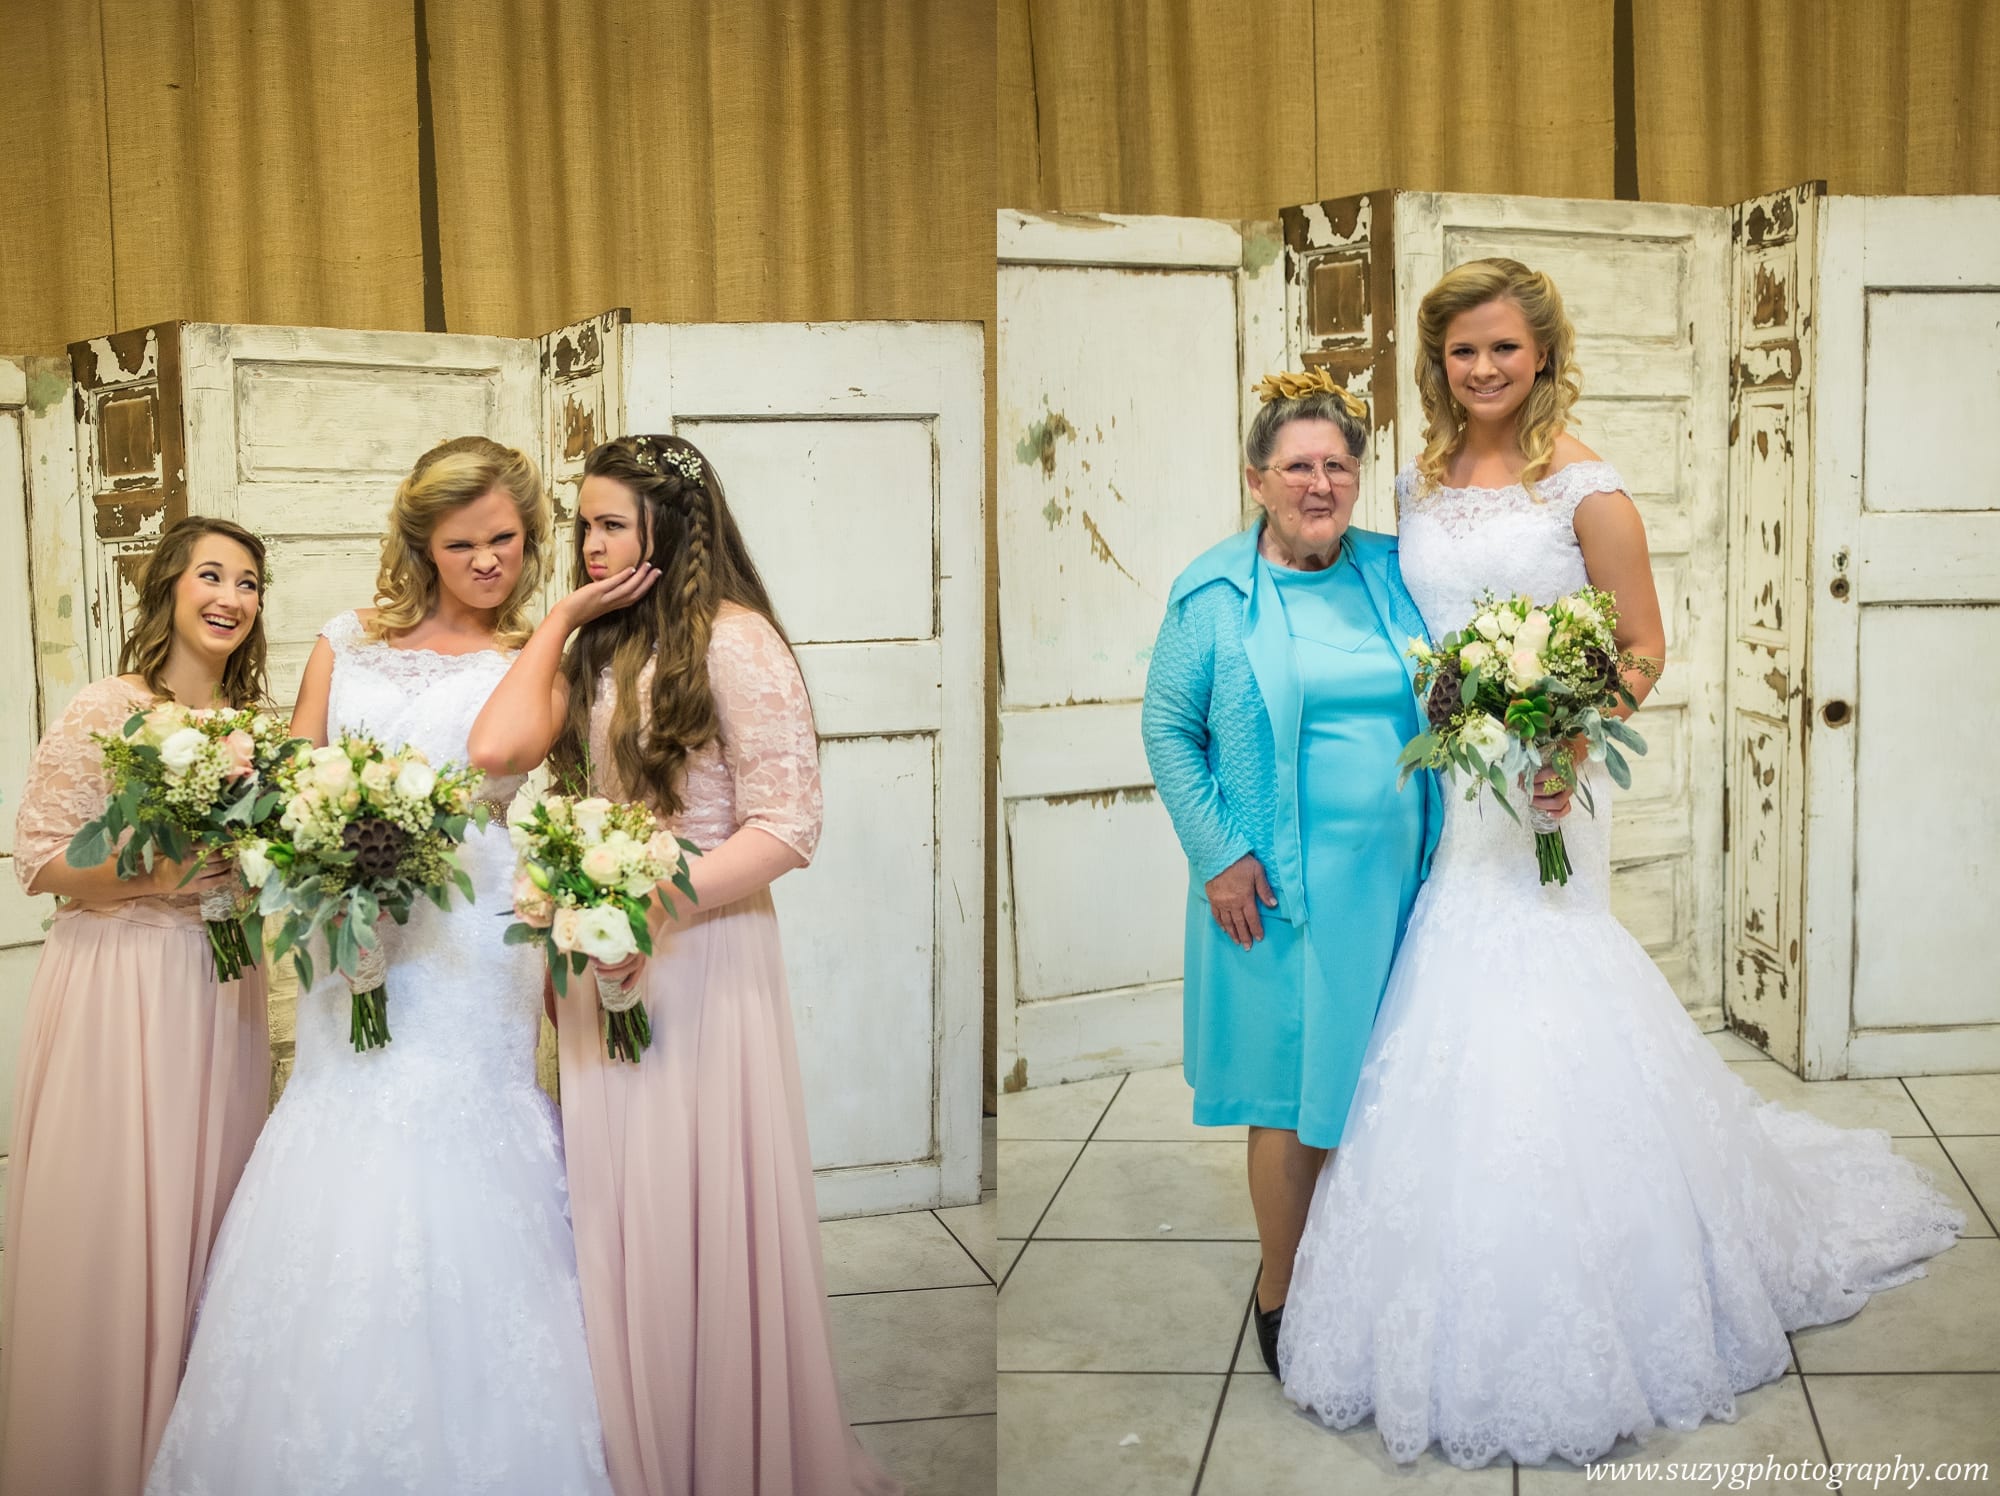 vows by victoria-lake charles-wedding-photography-suzy g-photography-suzygphotography_0034